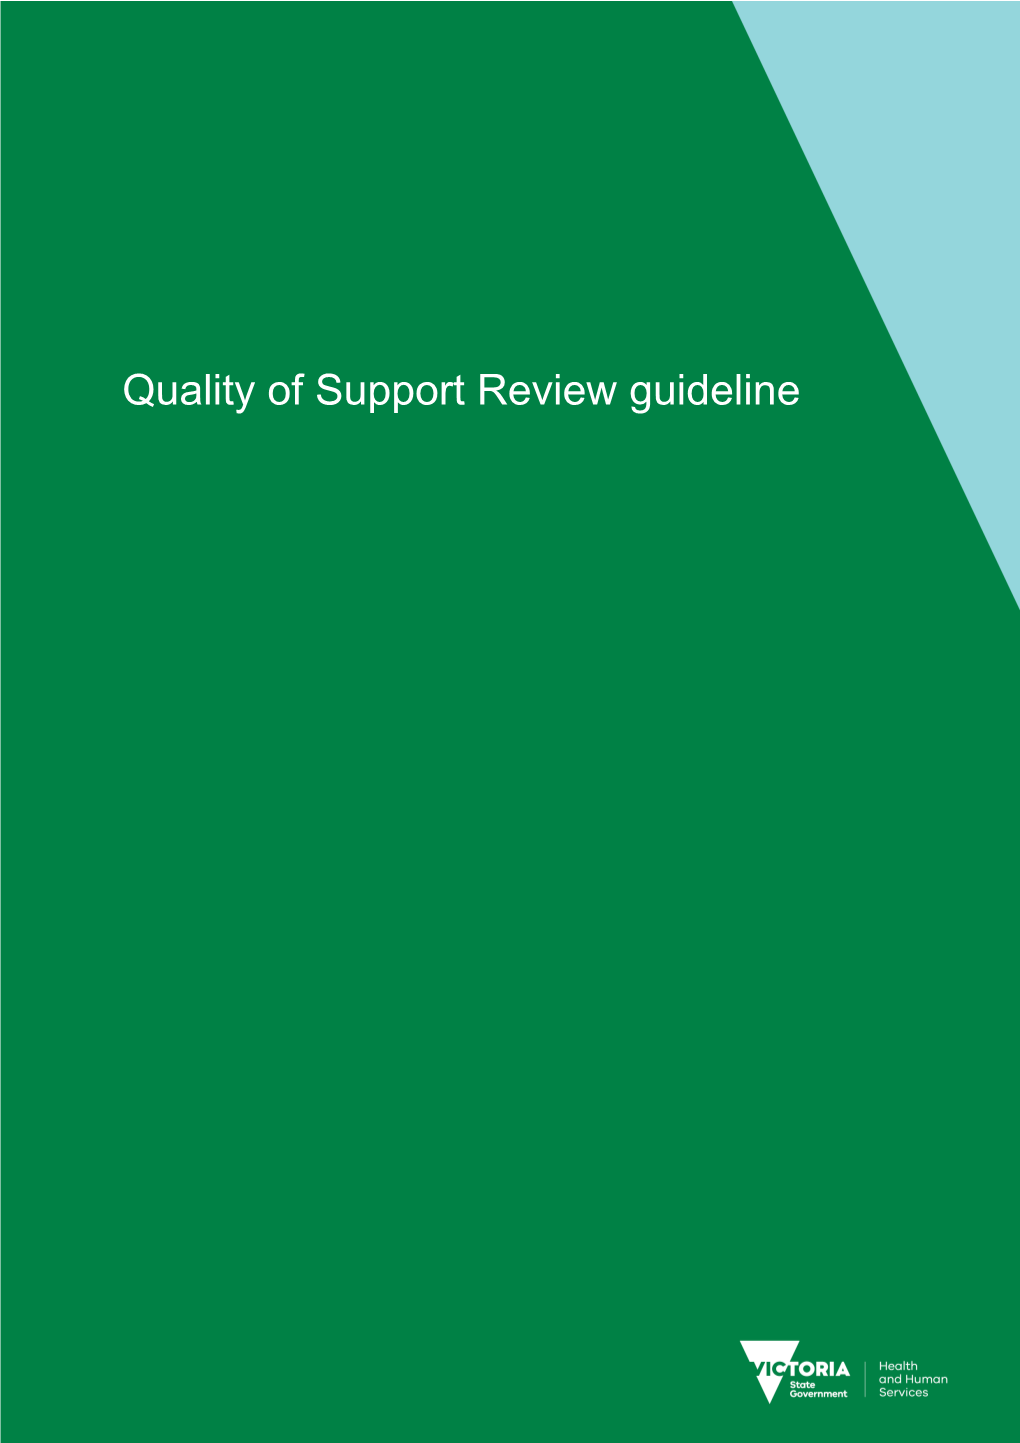 Quality of Support Review Guideline